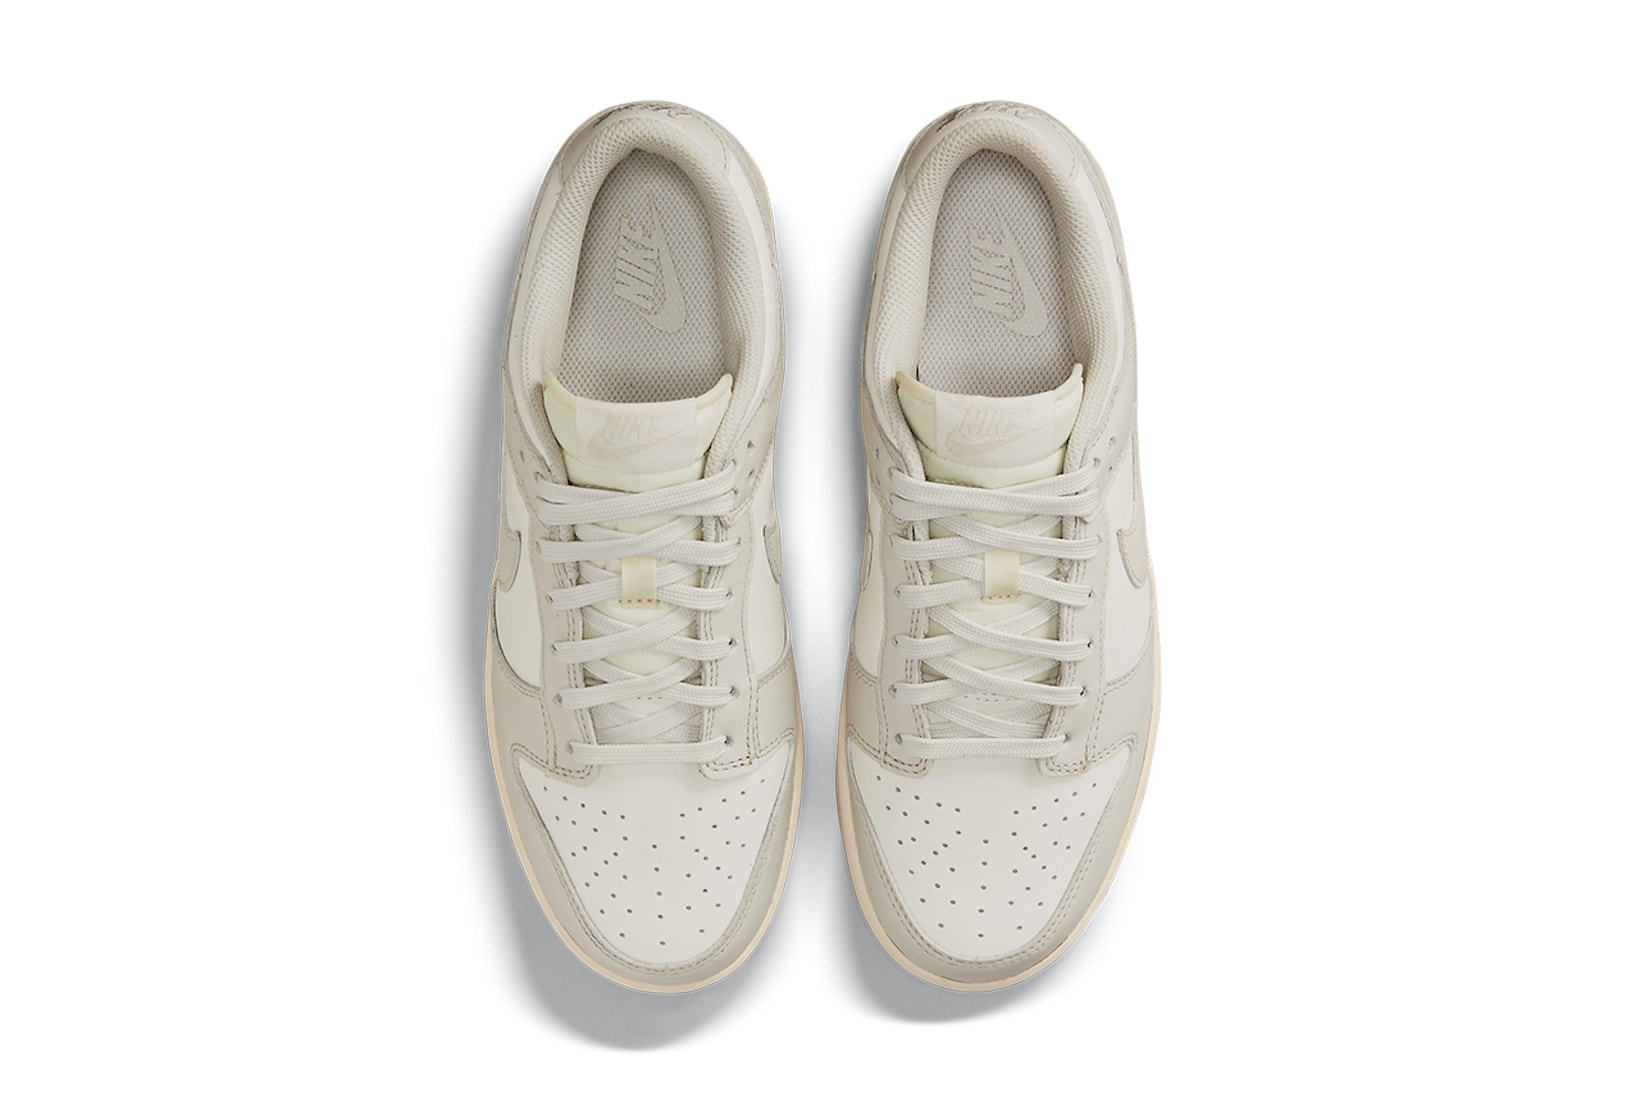 nike dunk low sneakers sail light bone cream white colorway footwear shoes kicks aerial top view insole